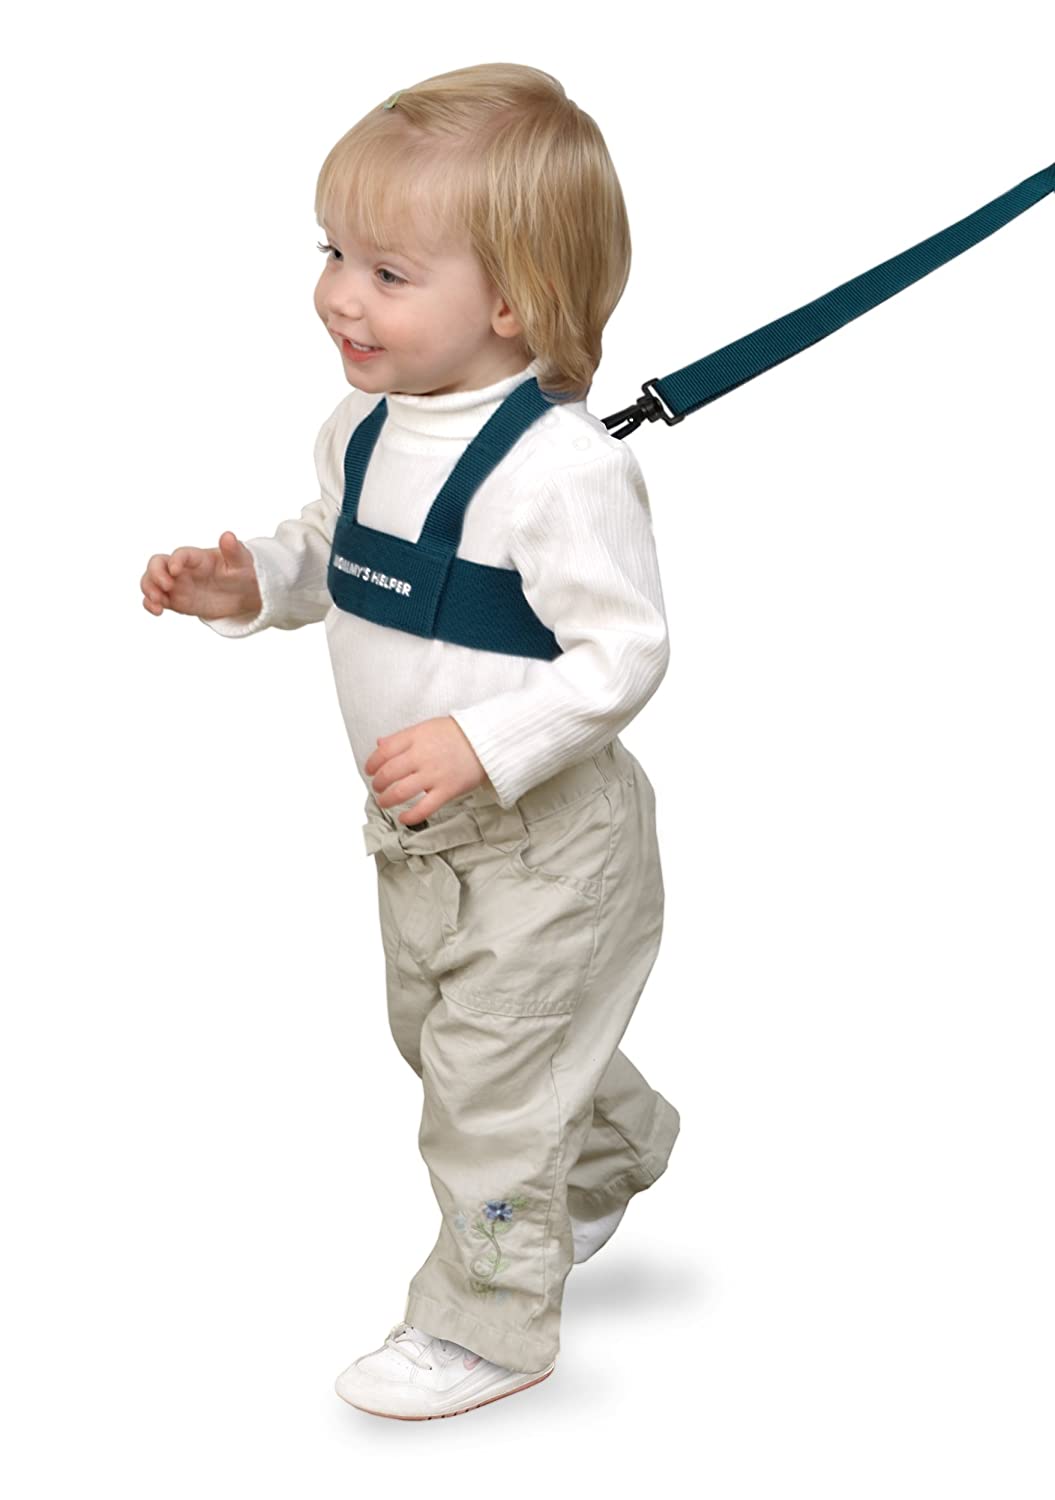 Top 7 Best Child Leashes, Backpacks, Straps & Harness Reviews in 2022 2